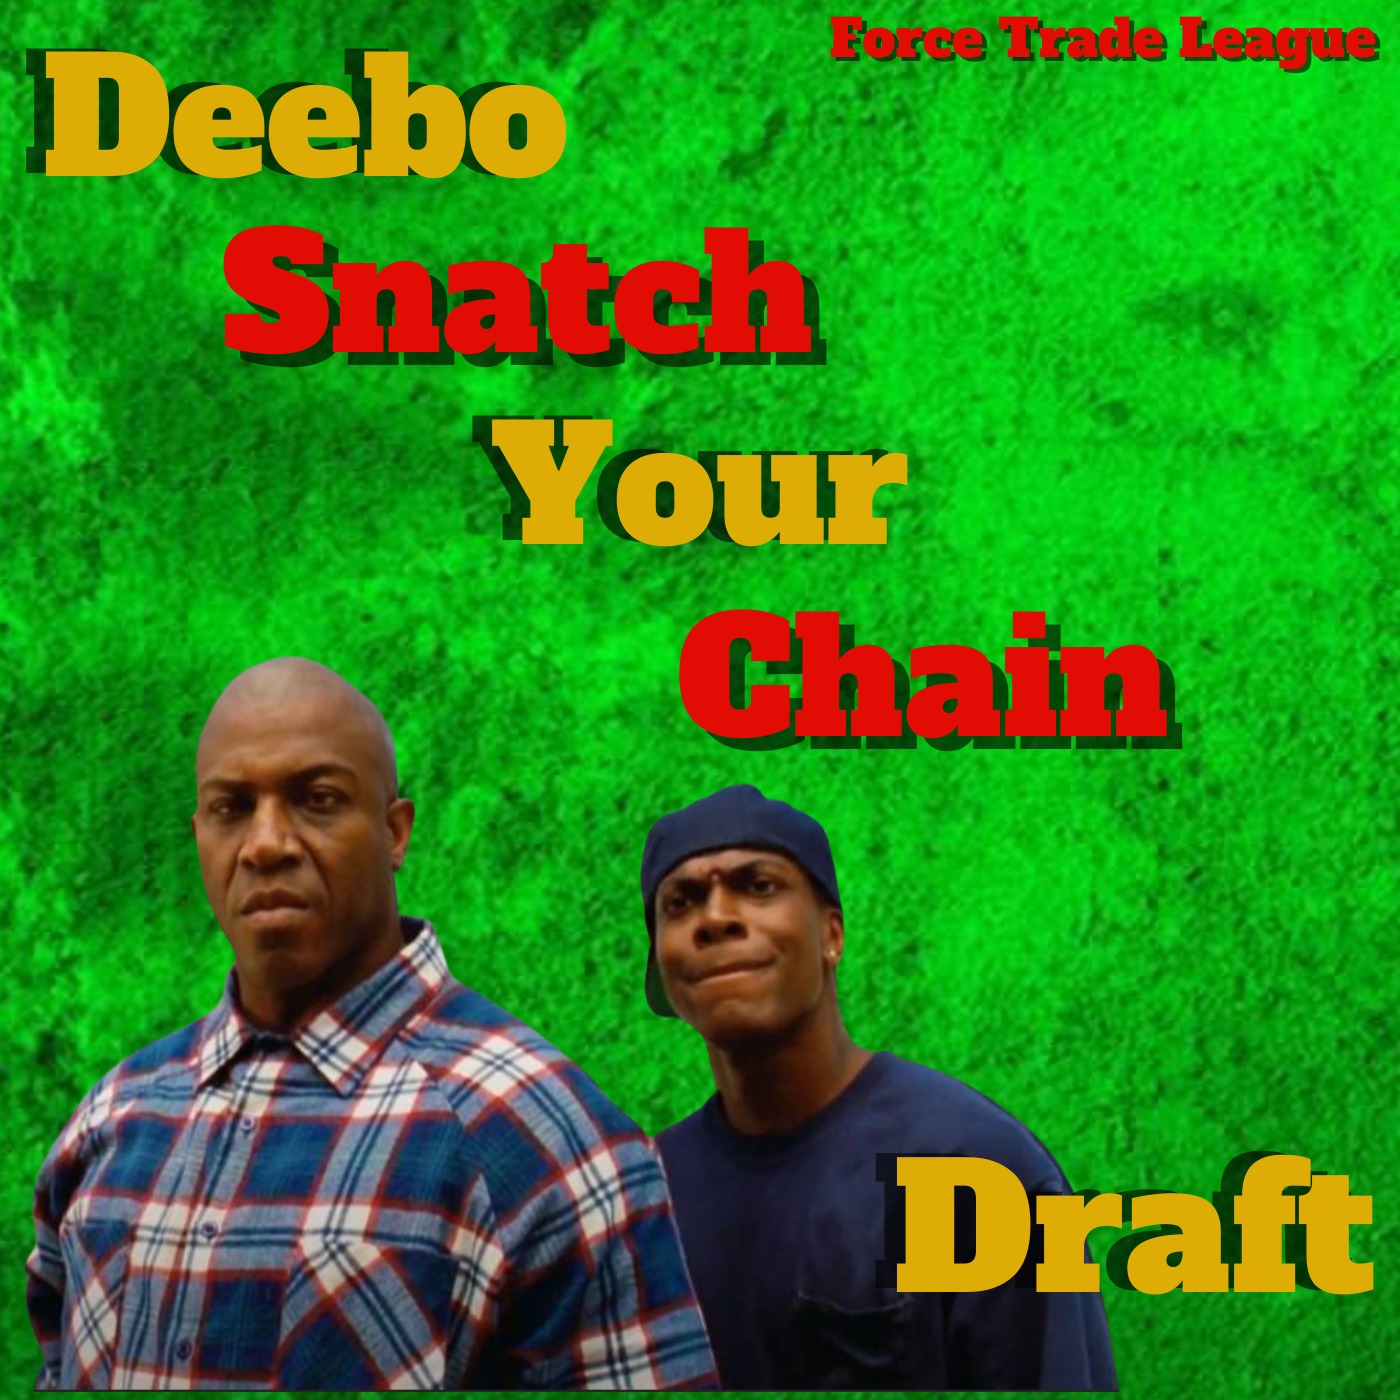 Deebo Snatch Your Chain Draft Order Race, Force Trade League Image